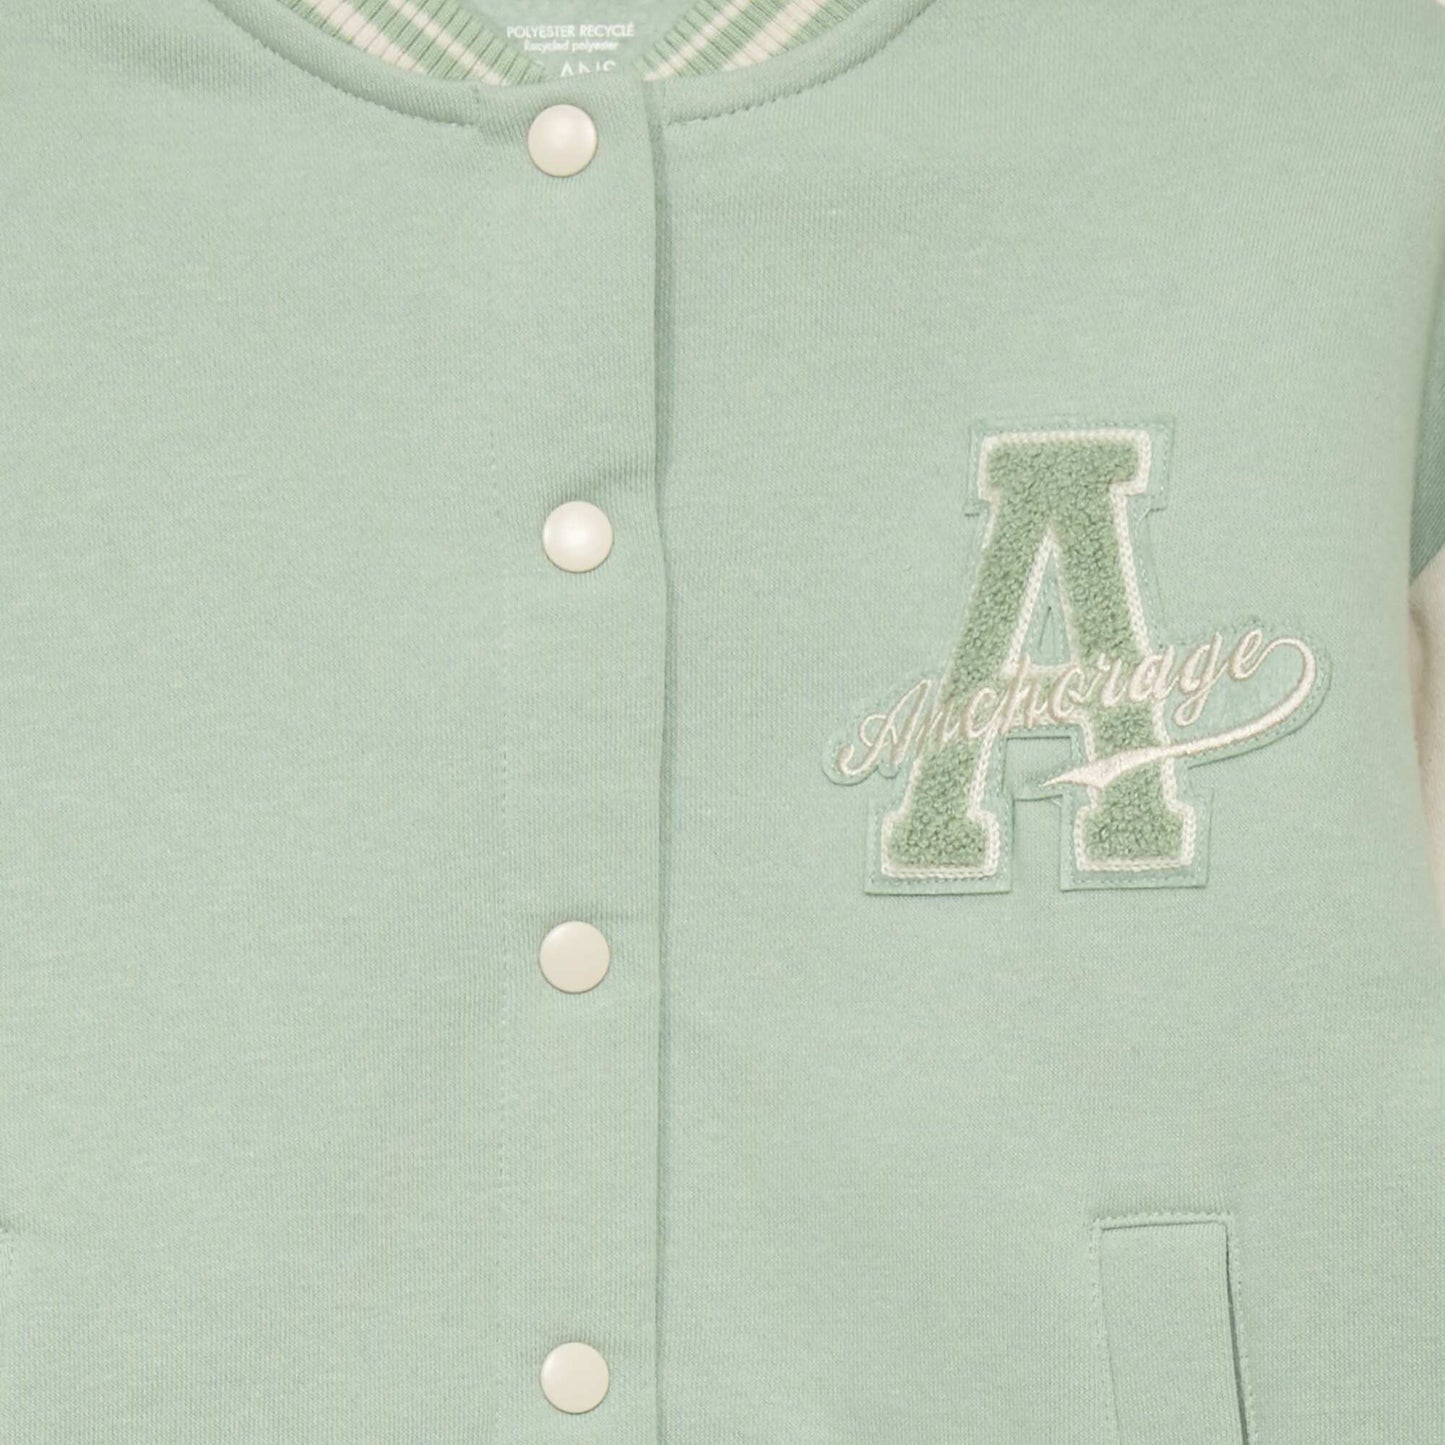 Campus-style jacket Green